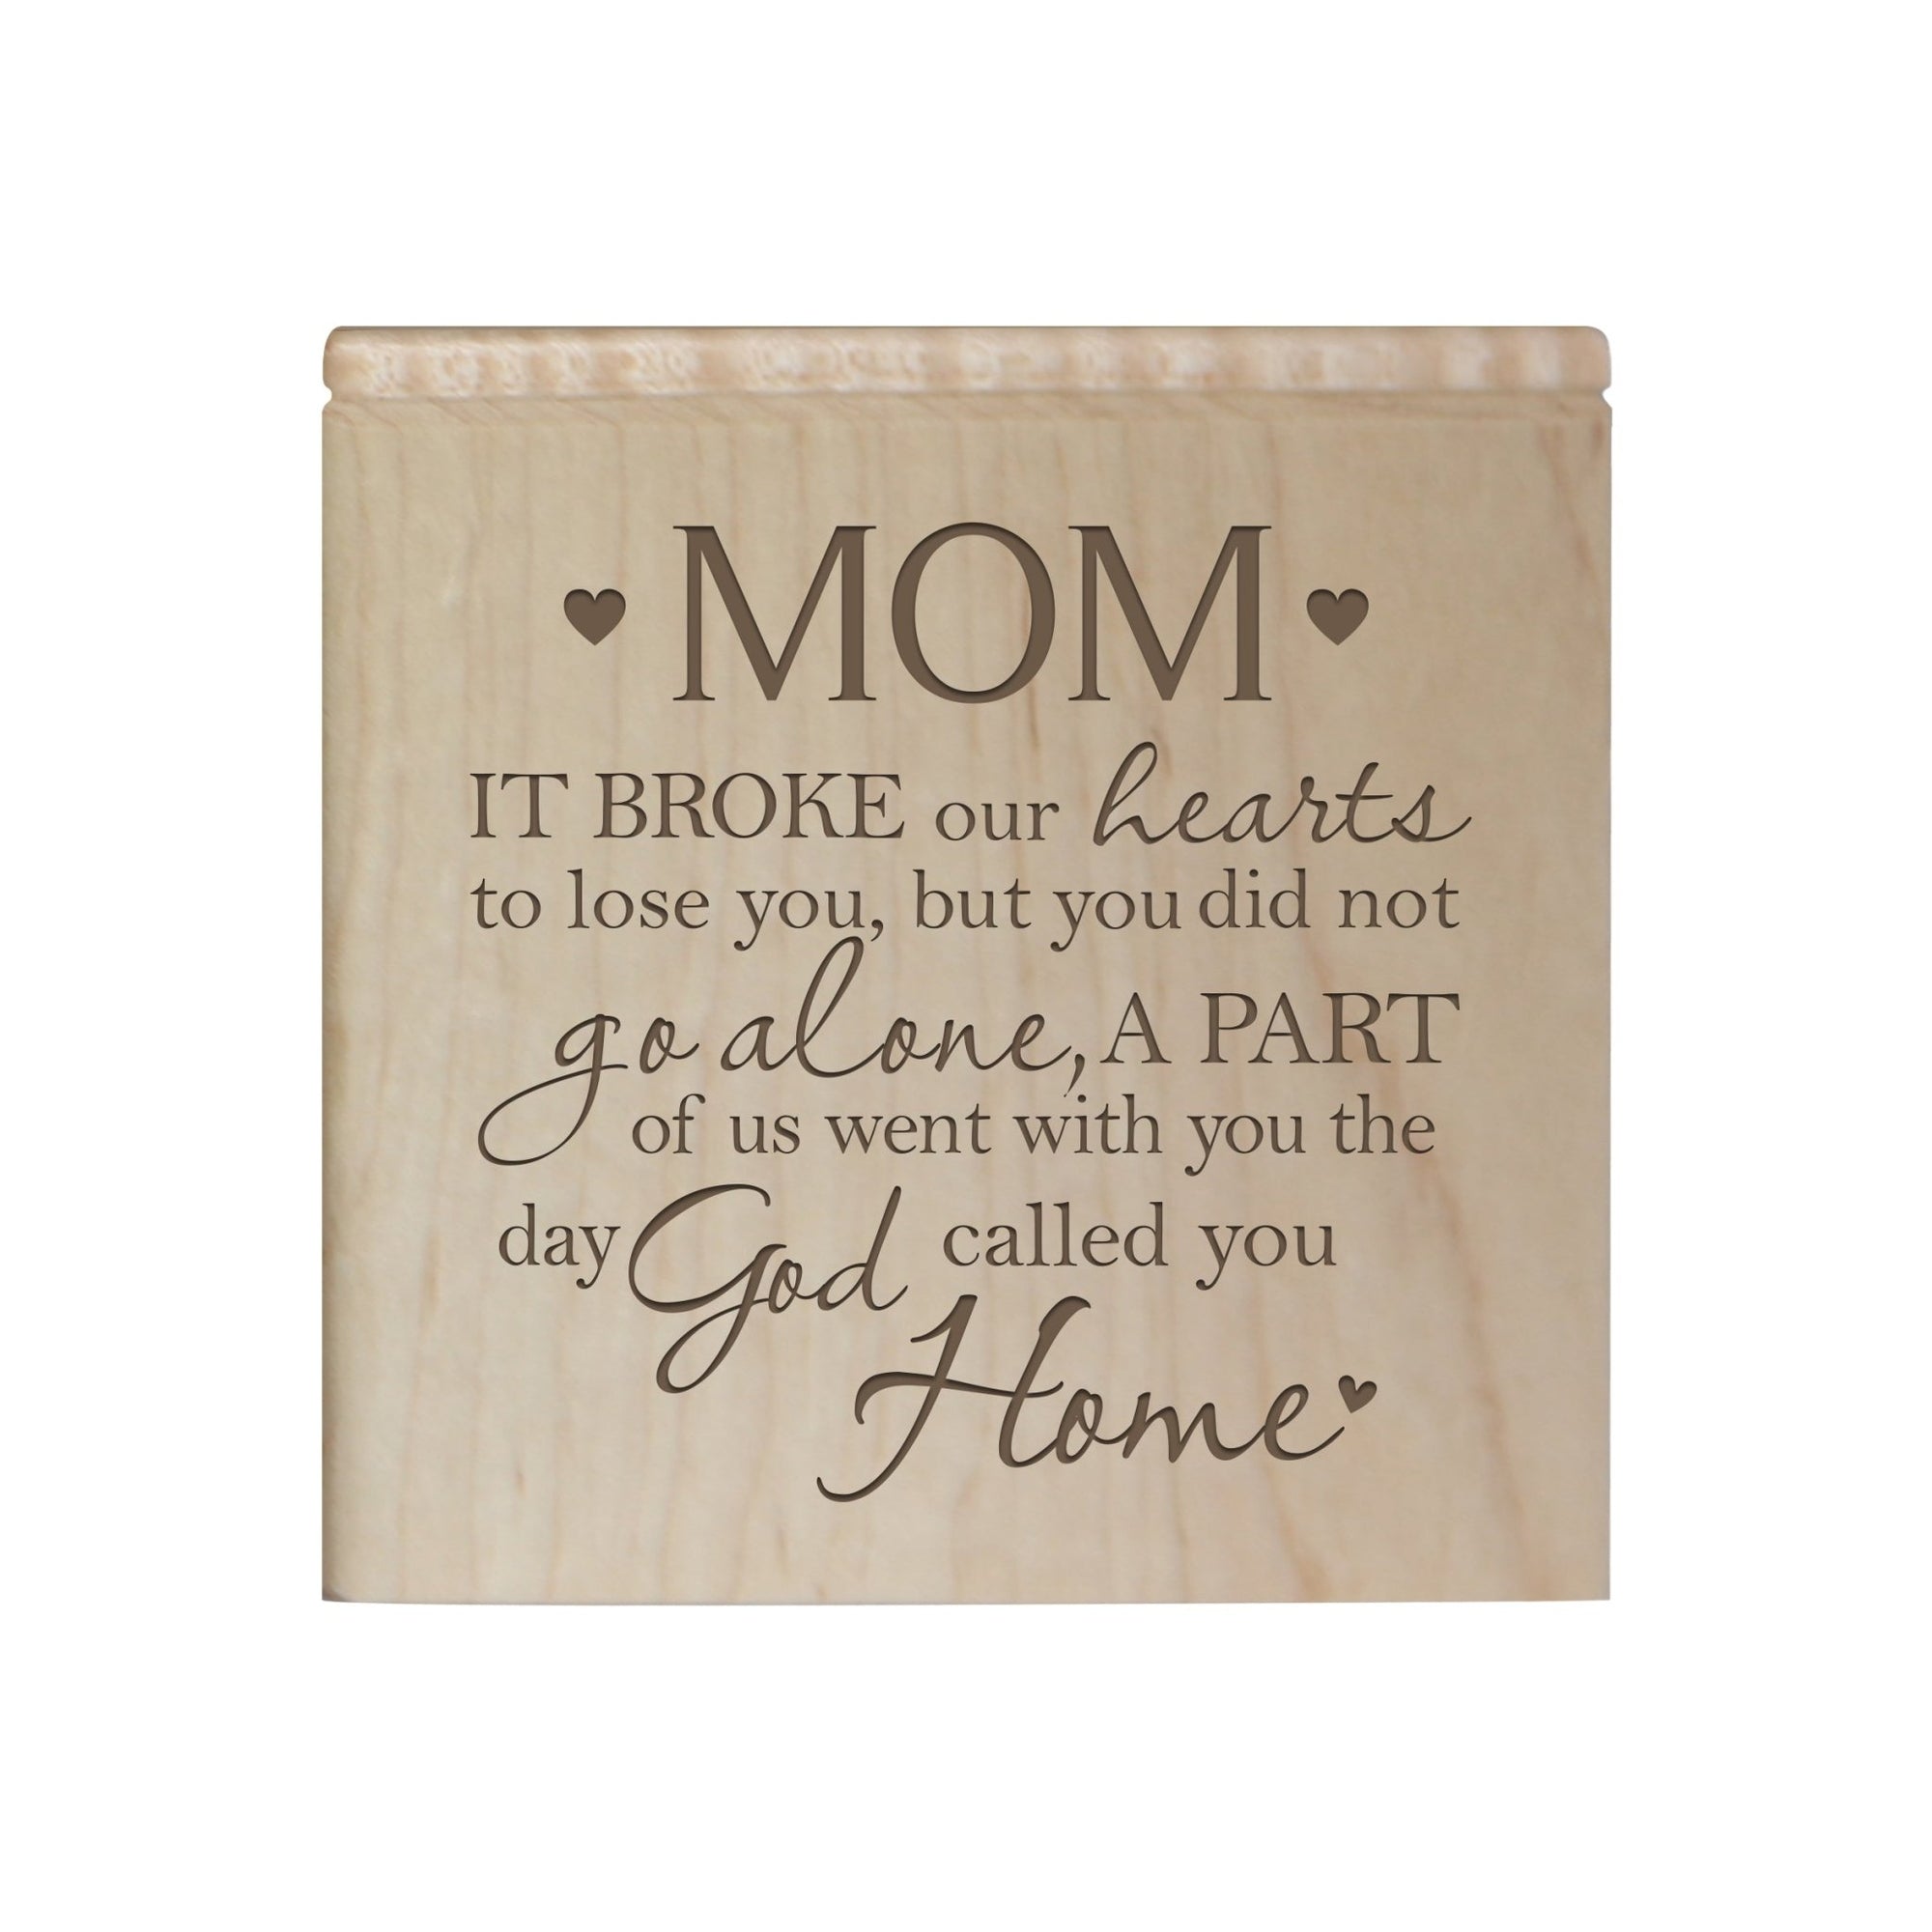 Modern Inspirational Memorial Wooden Cremation Urn Box 4.5x4.5in Holds 49 Cu Inches Of Human Ashes (It Broke Our Hearts Mom) Funeral and Commemorative Keepsake - LifeSong Milestones